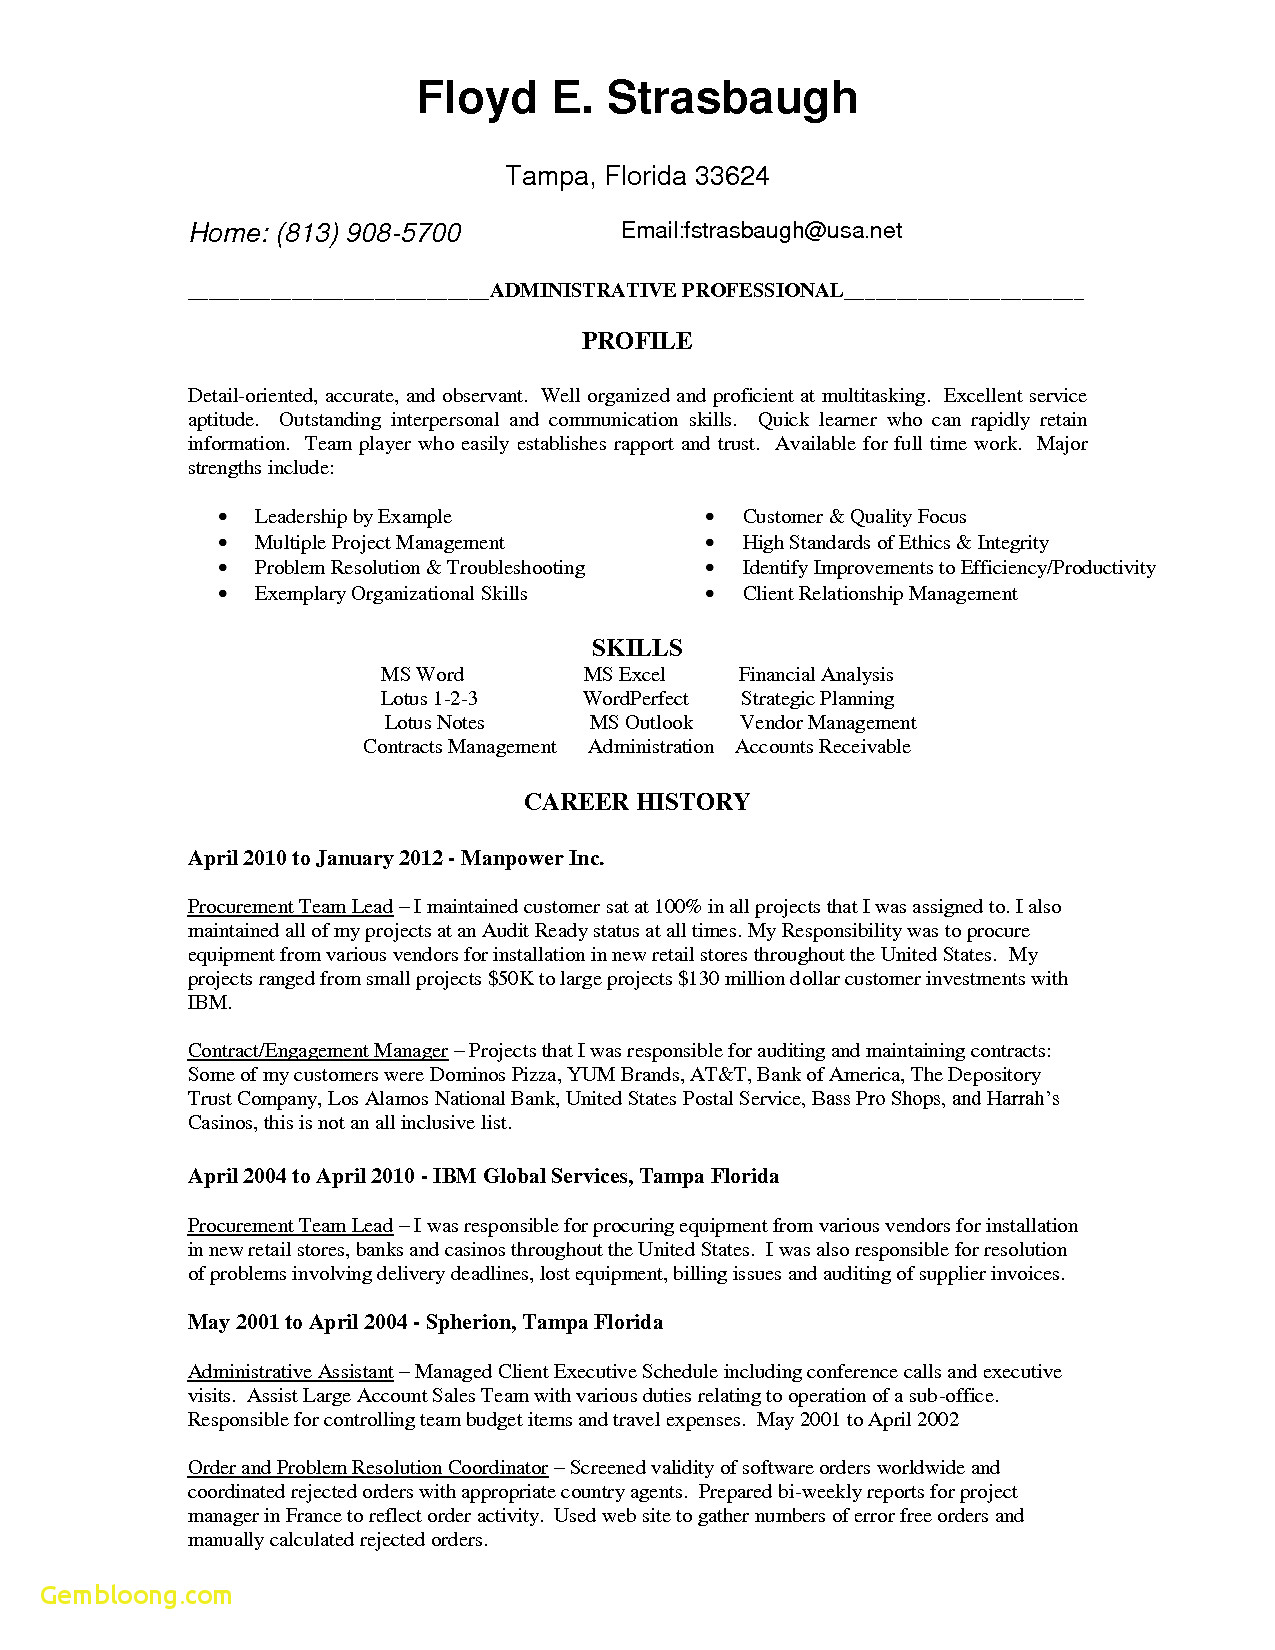 Cover Letter Template Doc Download - Resume Template Word Doc Download now Executive Resume Templates